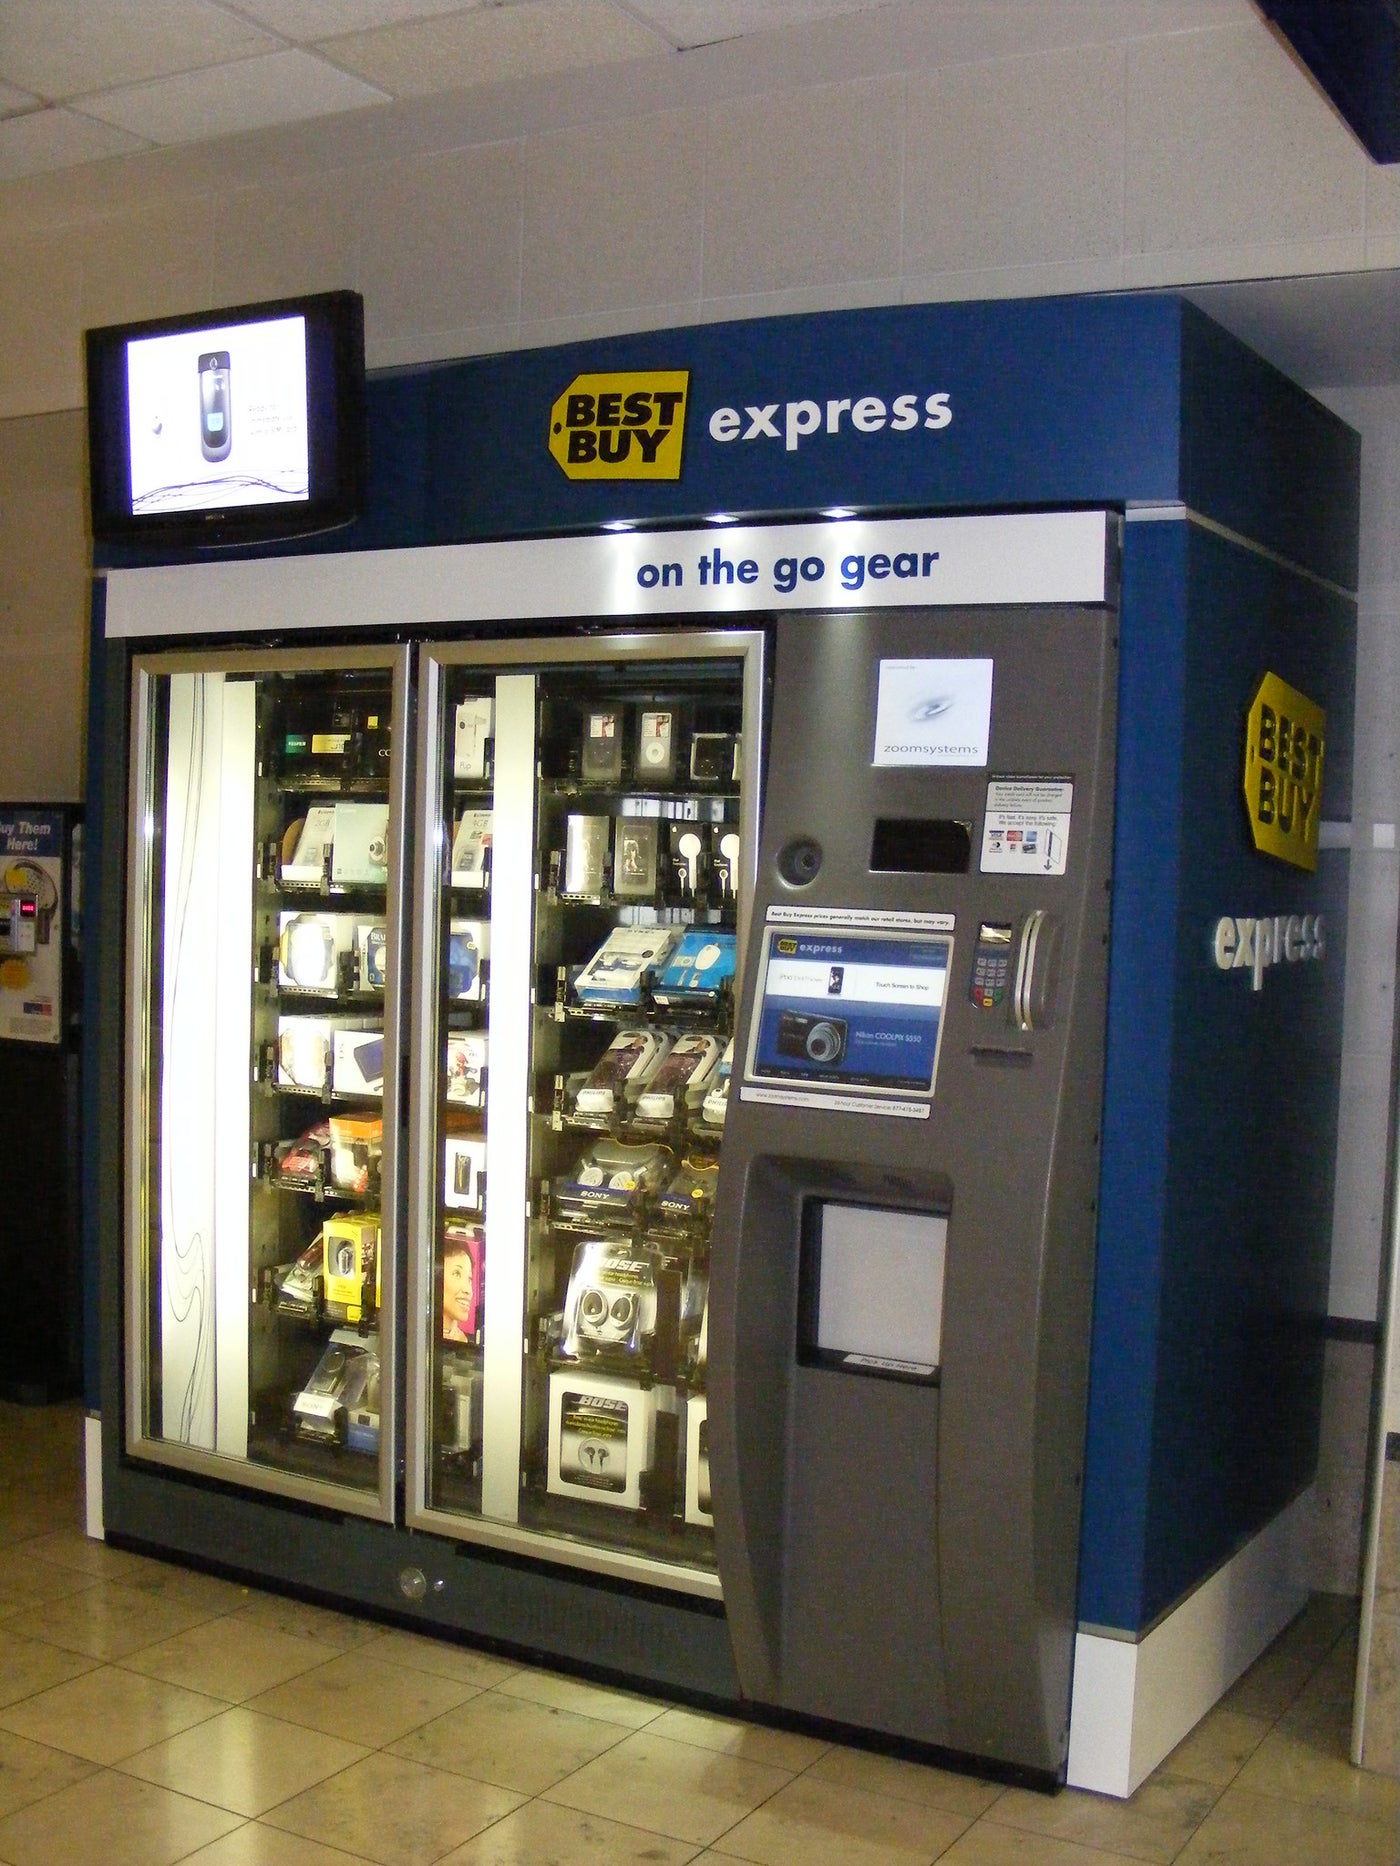 You'd be amazed at what you can buy in an airport vending machine - The